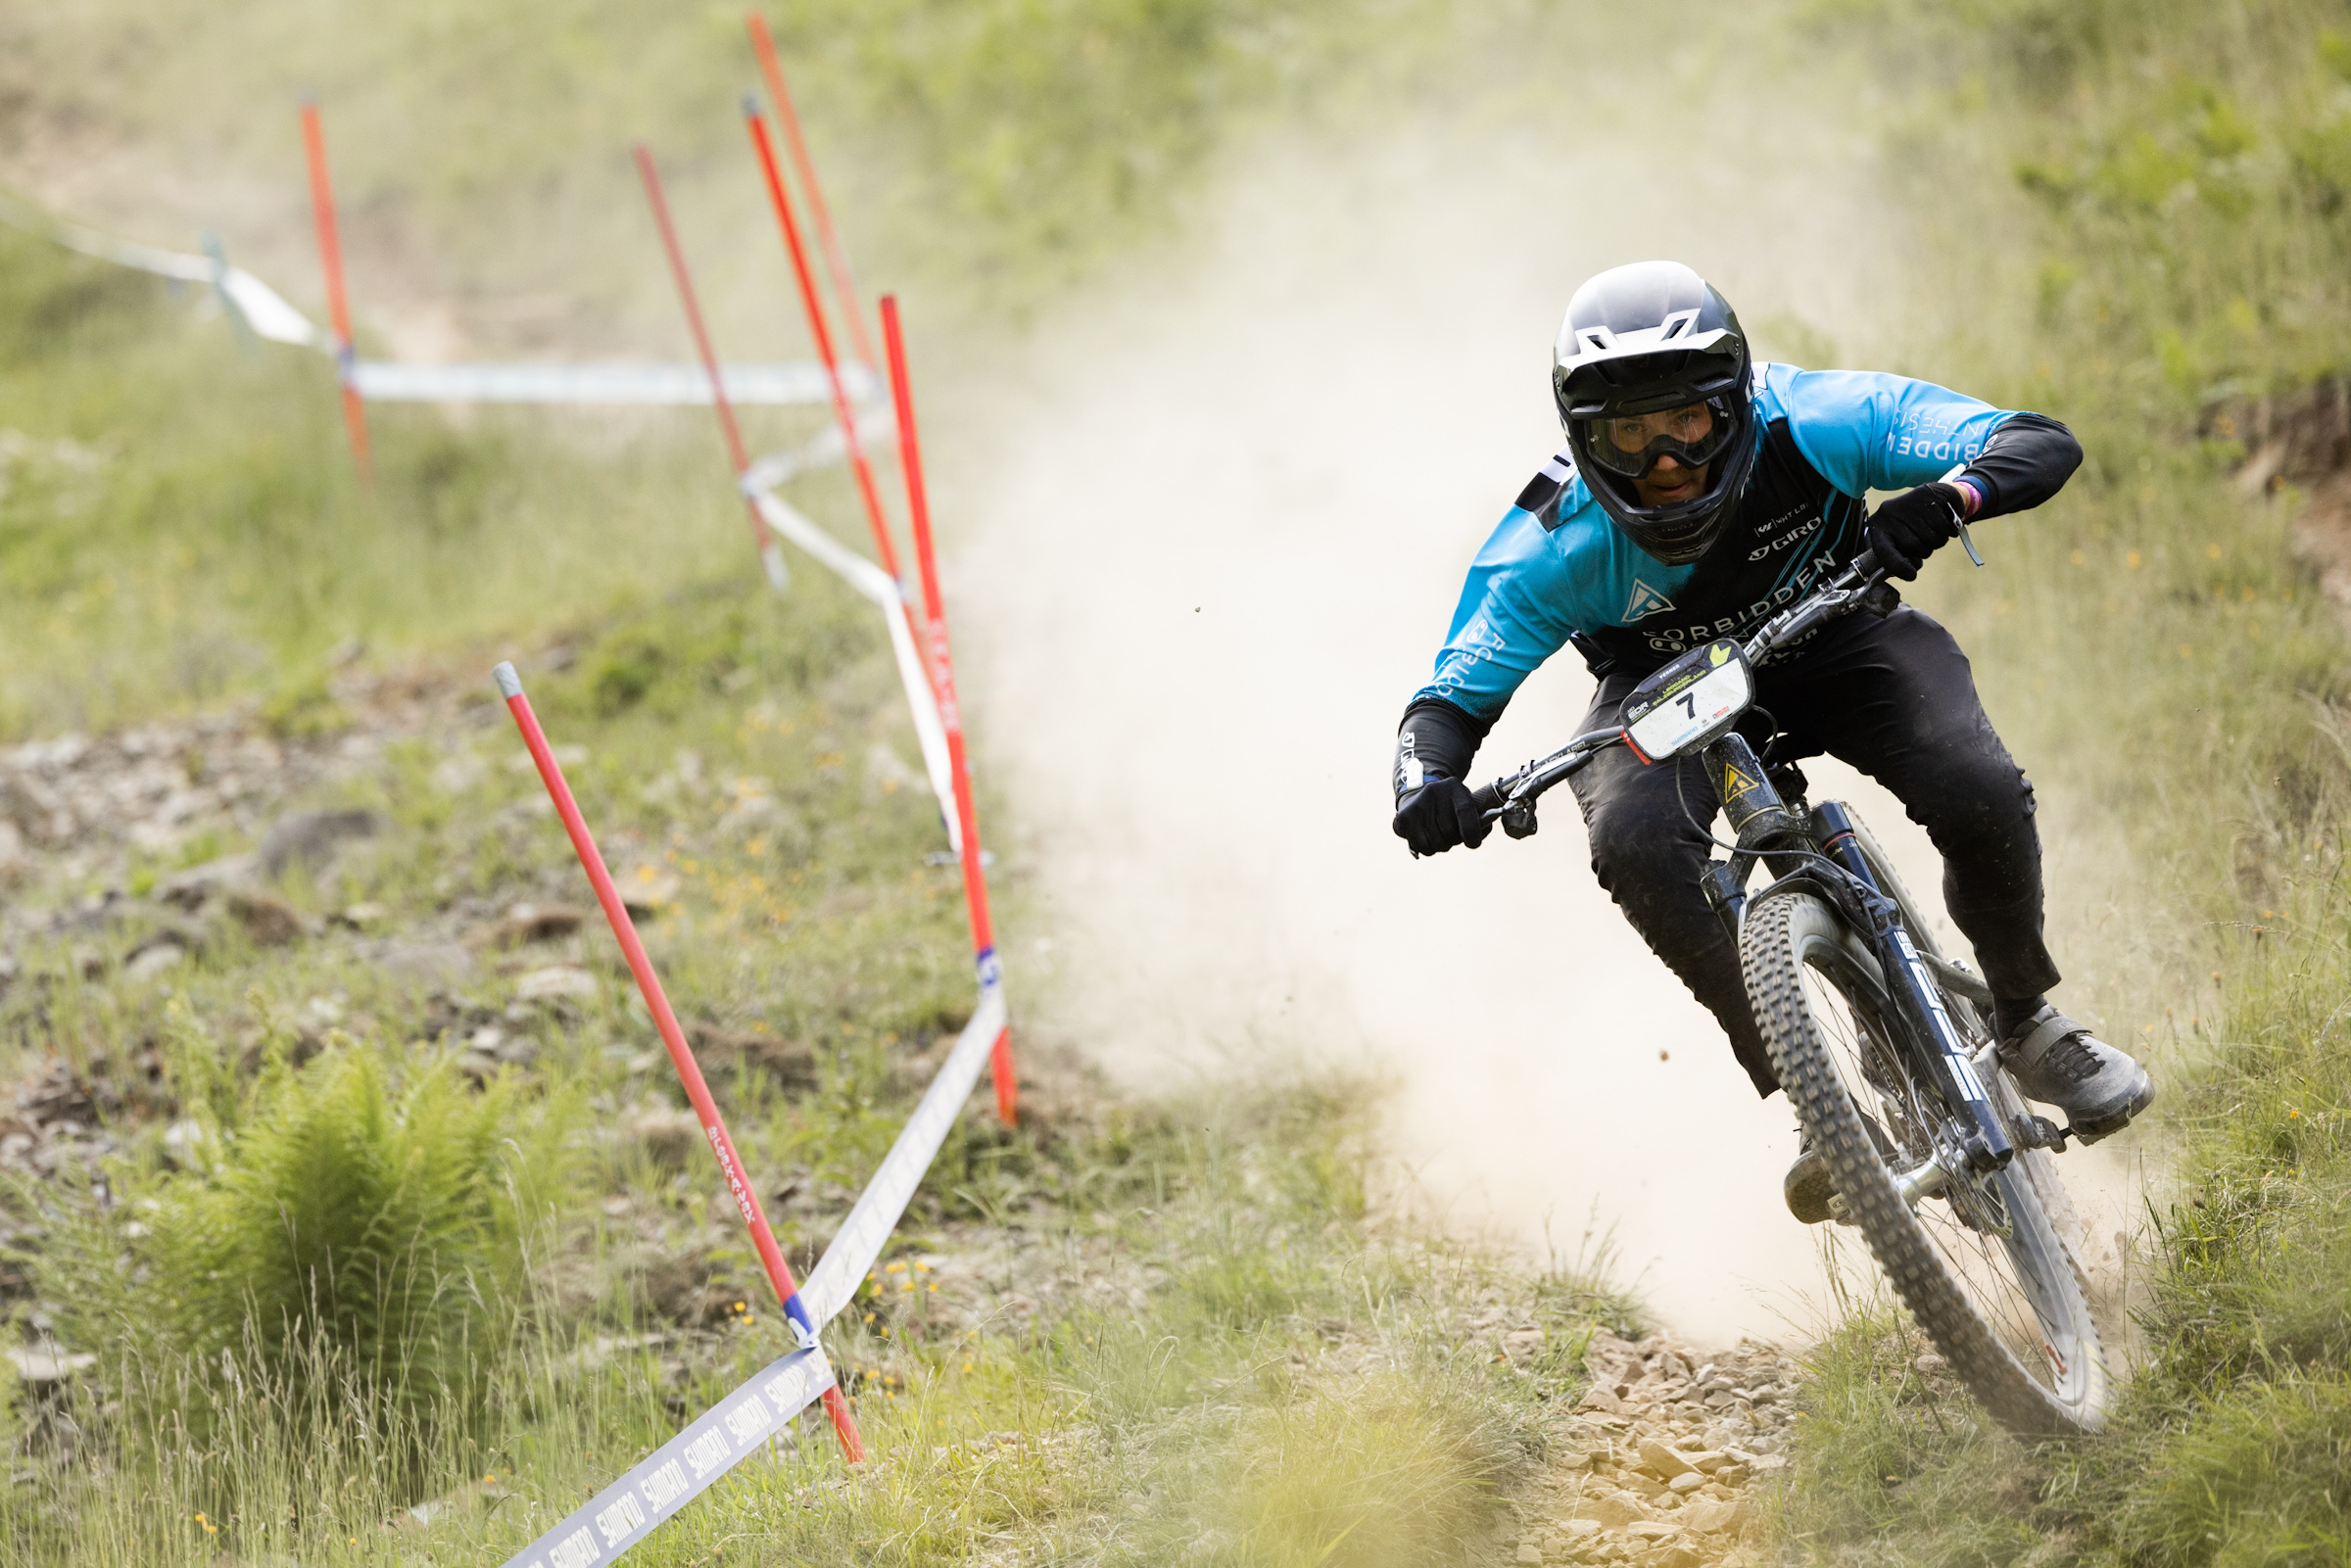 Courdurier and Verner triumph in Leogang